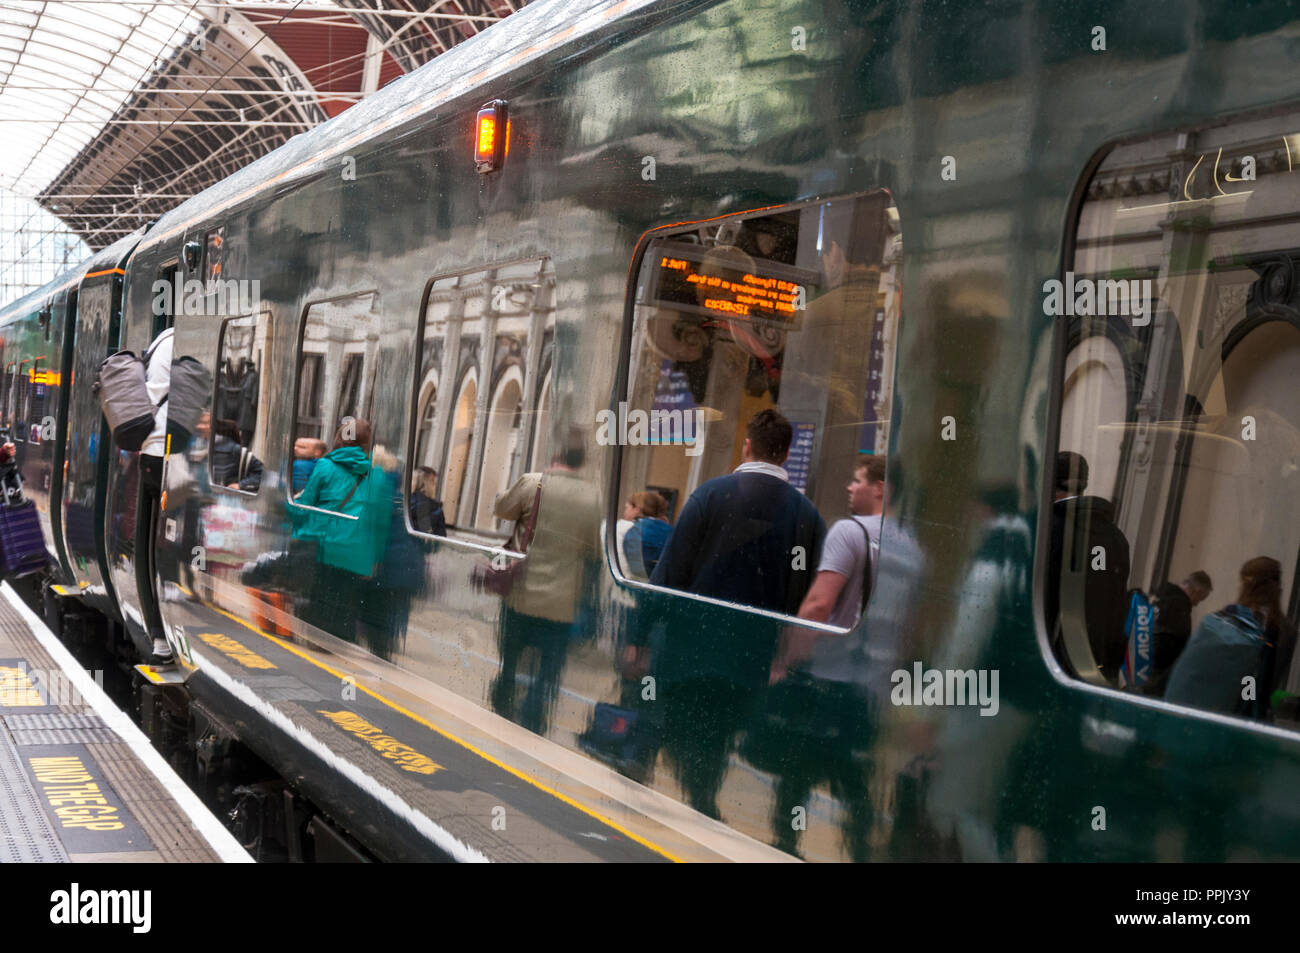 Reflections of passengers in a GWR train at Paddington Station, London, UK Stock Photo